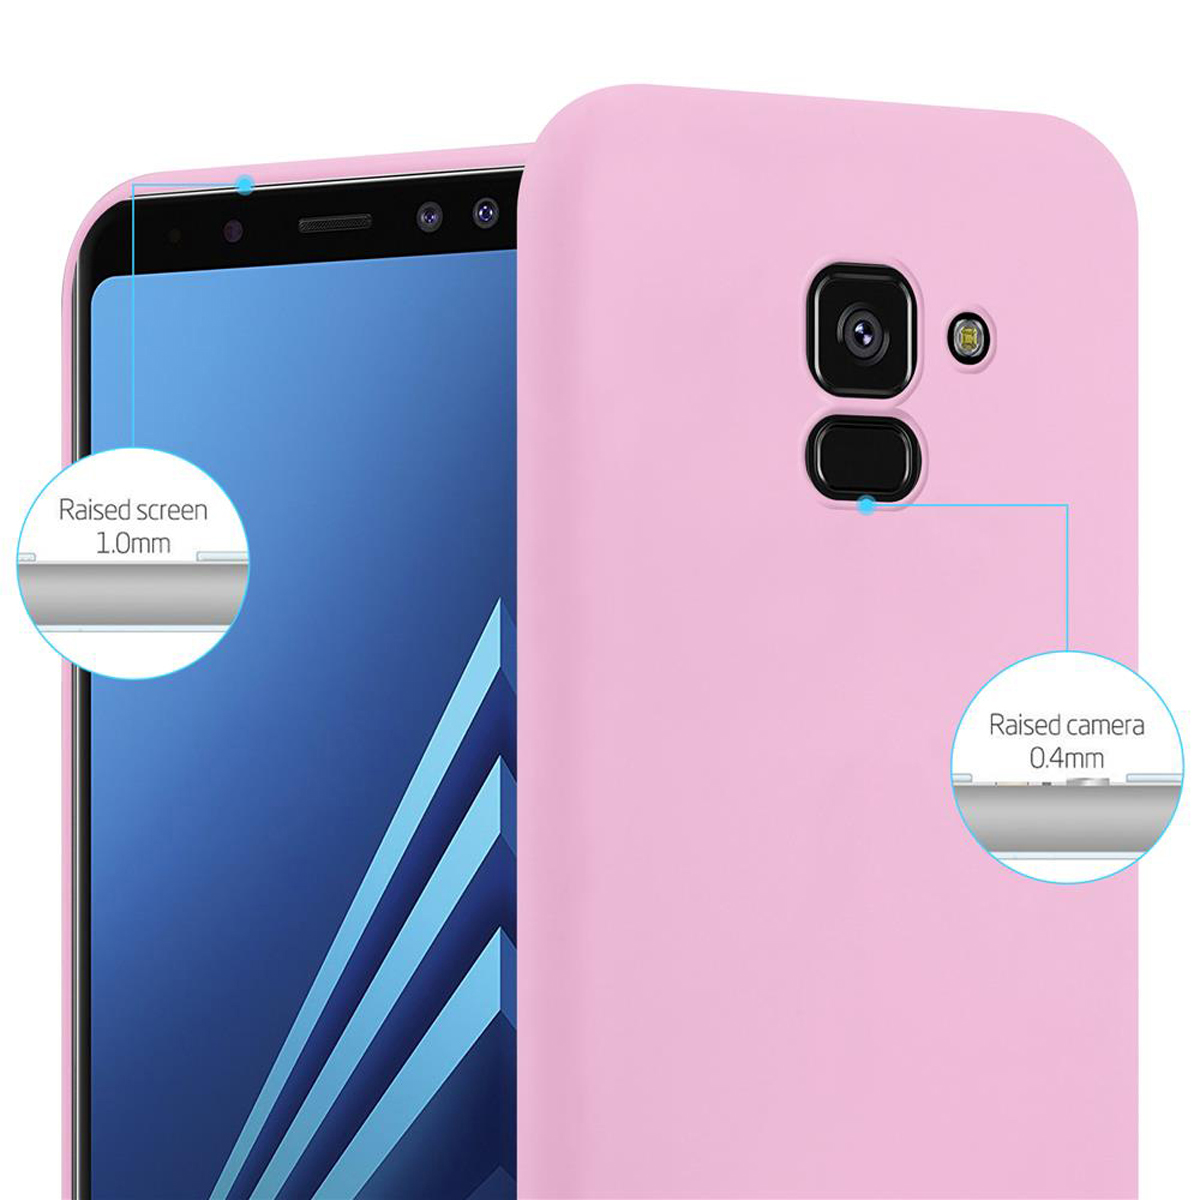 PLUS Style, TPU A8 Backcover, Samsung, CADORABO Galaxy im Hülle 2018, CANDY ROSA Candy